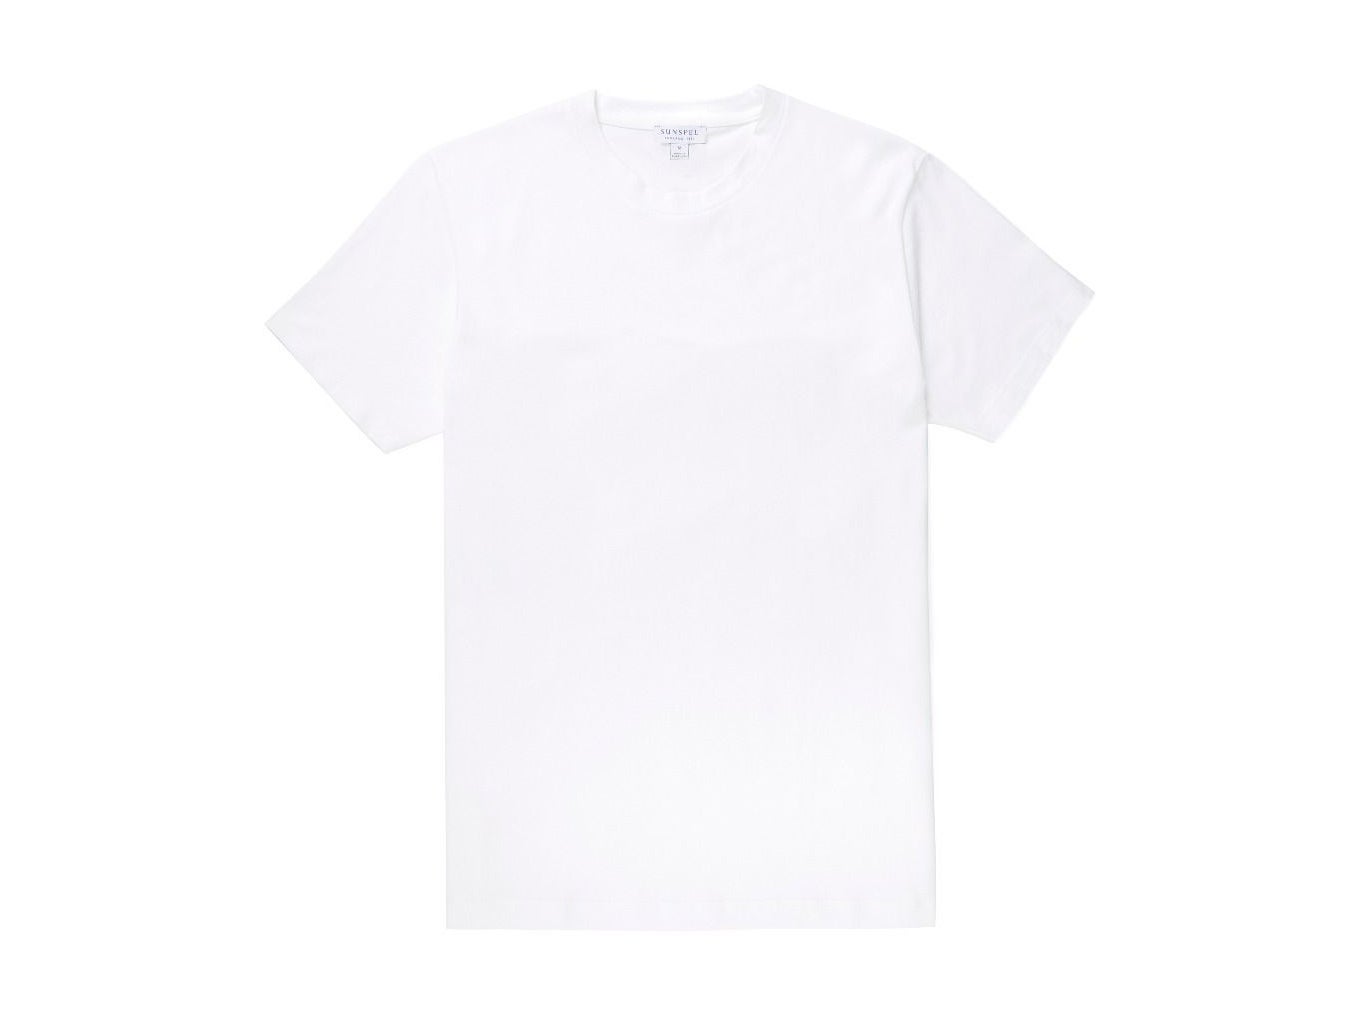 cursief Op grote schaal commentaar Best white T-shirt for men 2021: From Nike, H&M and Uniqlo | The Independent